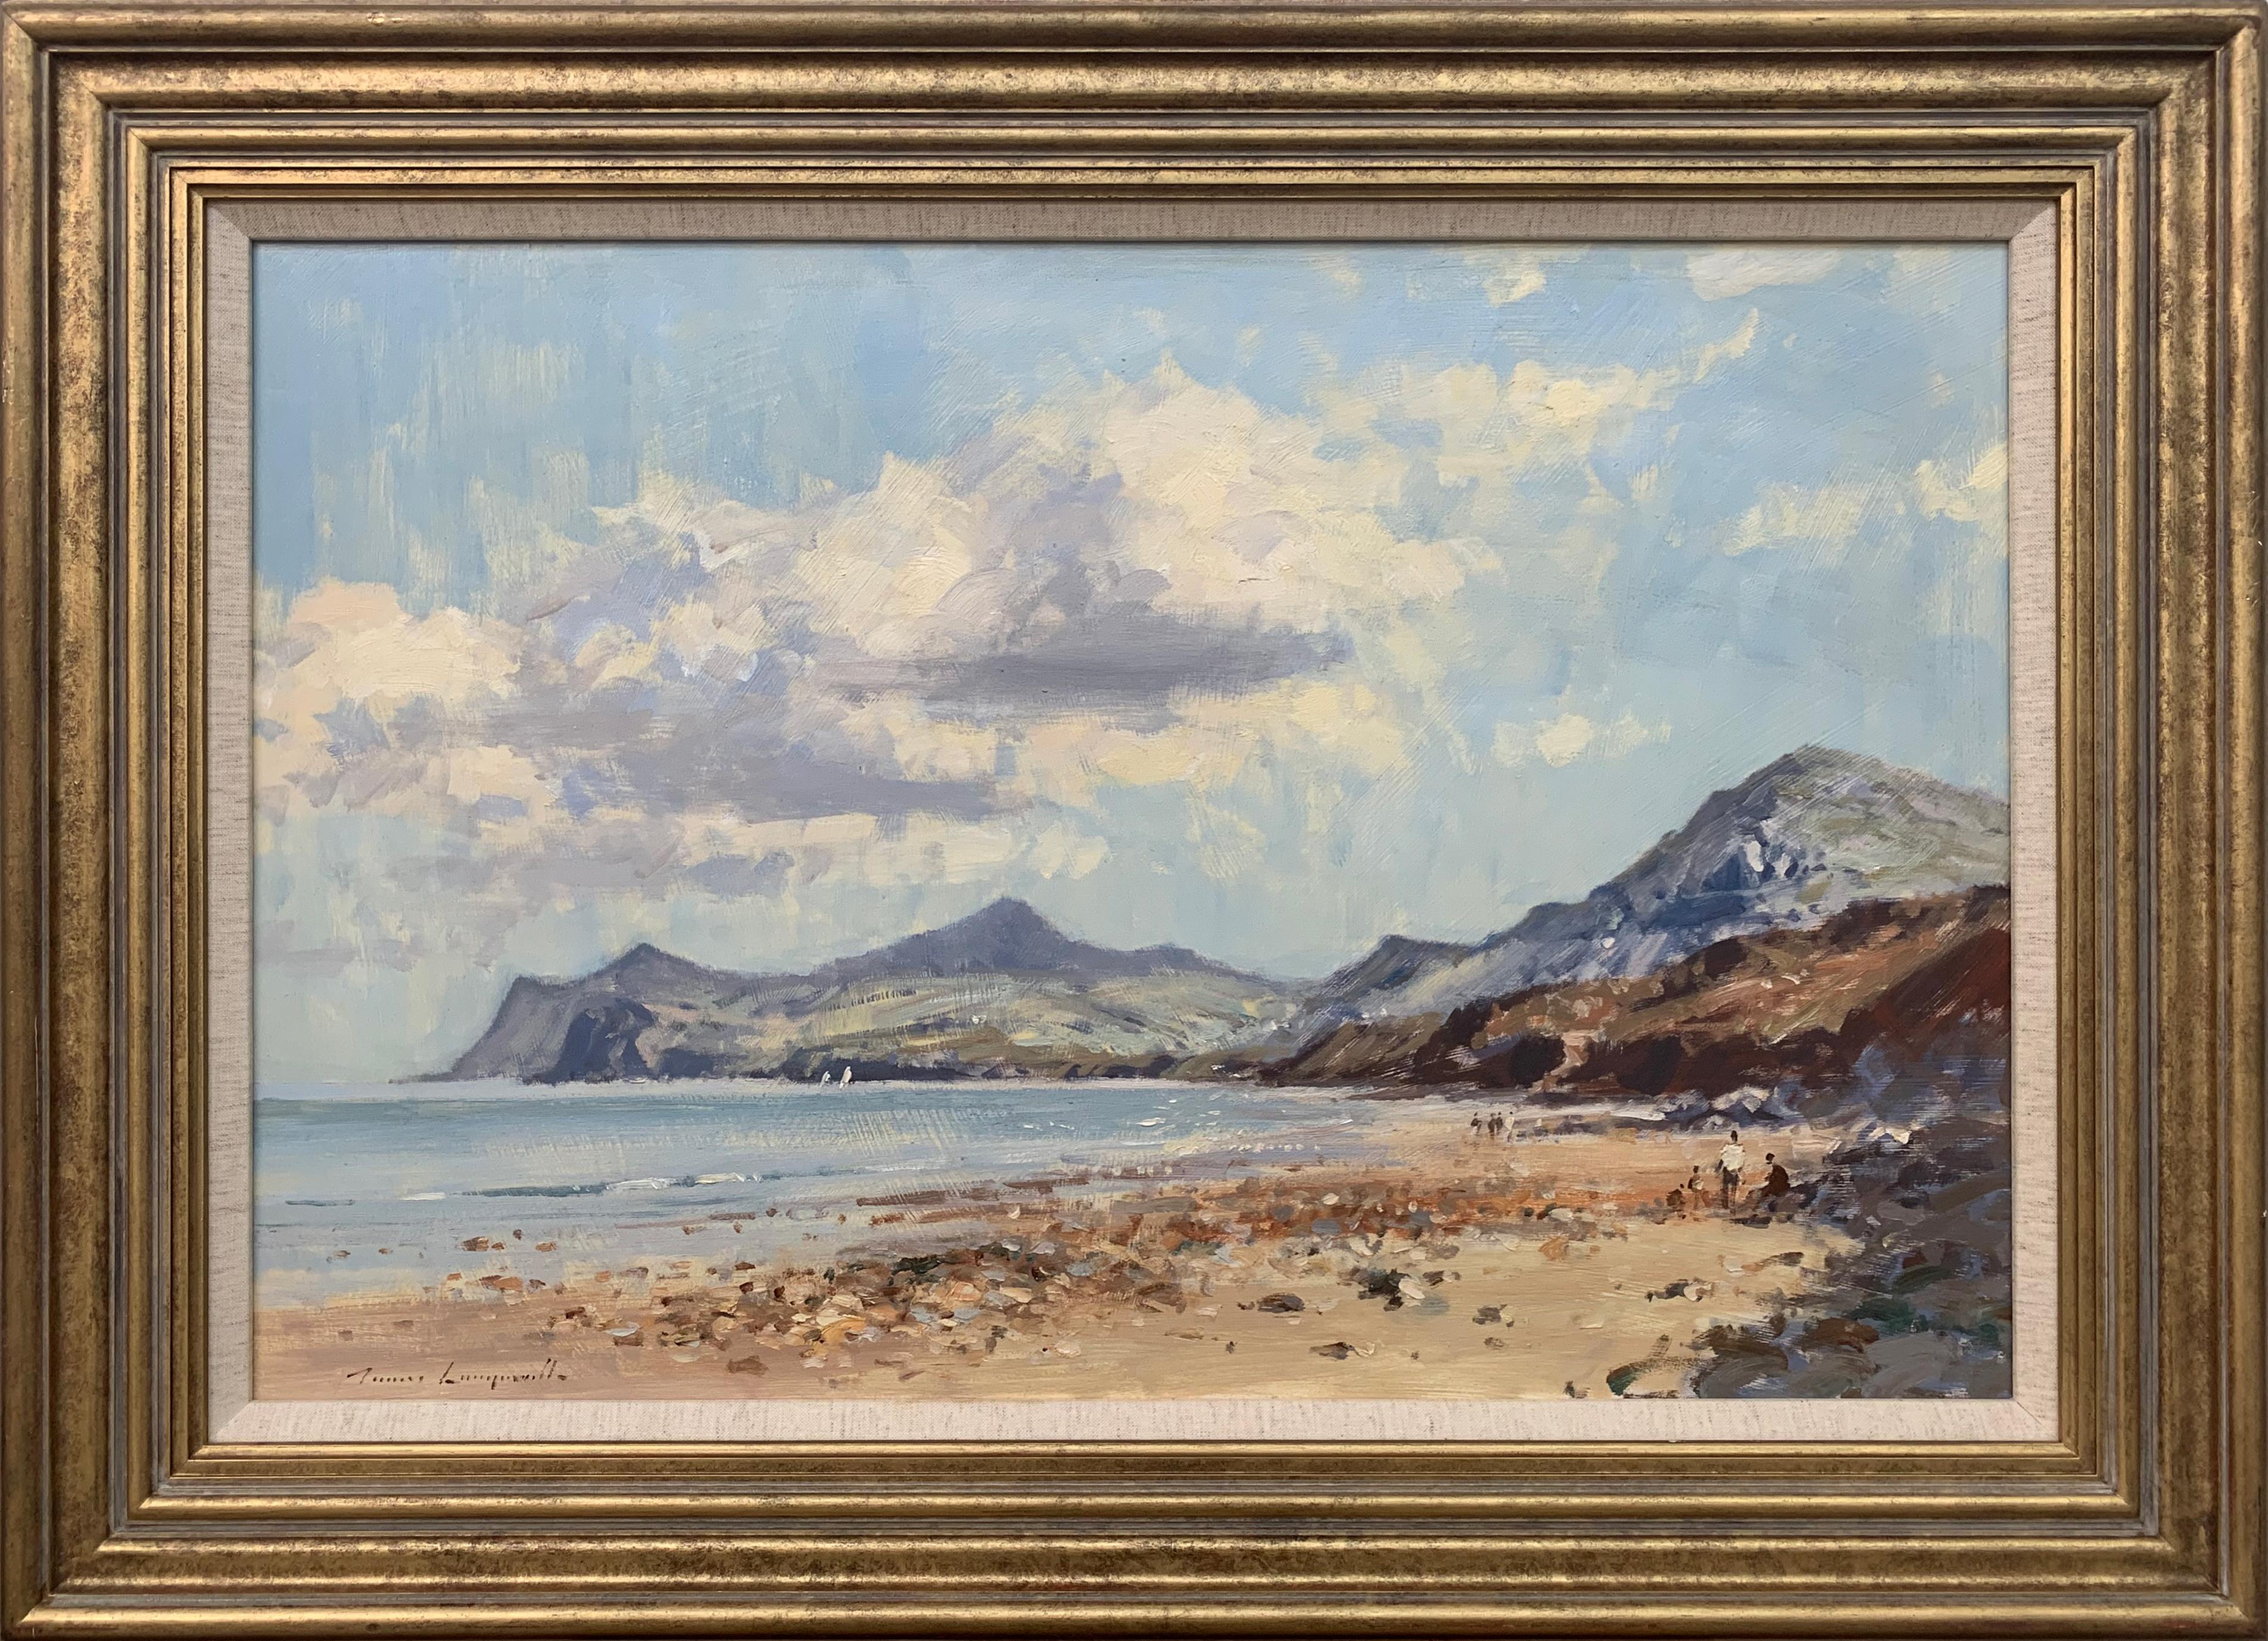 Landscape Seascape Painting of Coast from Nefyn in North Wales by British Artist